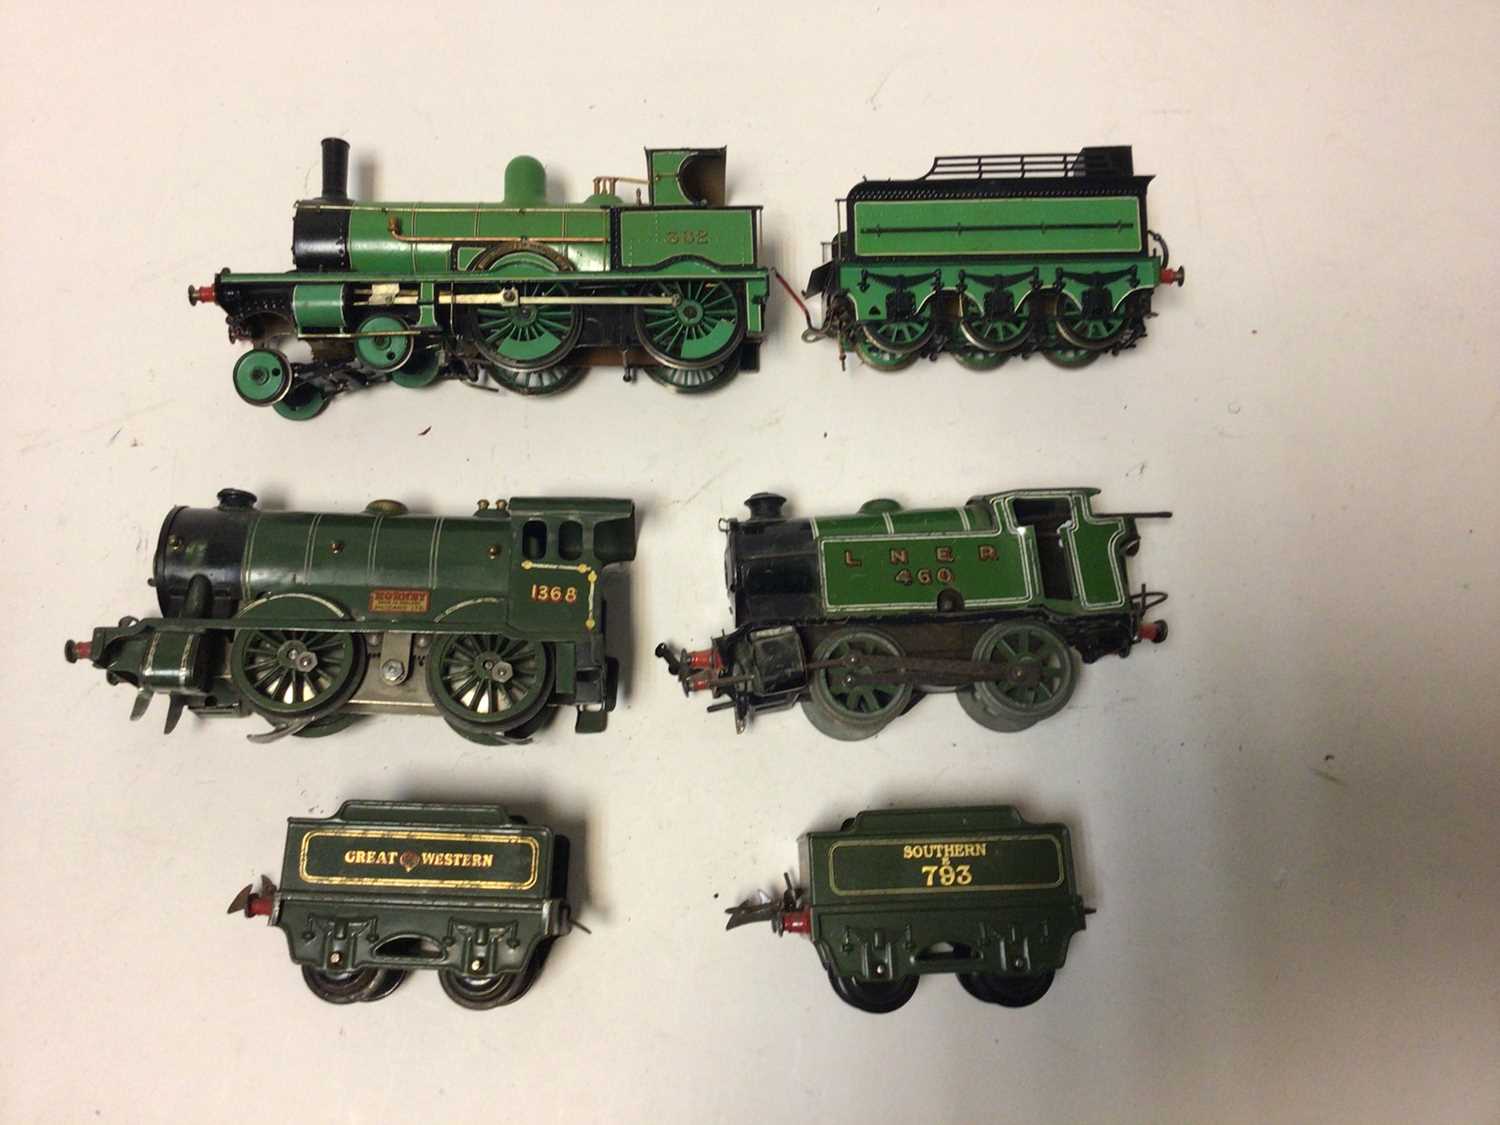 Railway O gauge selection of unboxed locomotives including 0-4-0 Hornby three rail 1368, LNER 460, 4